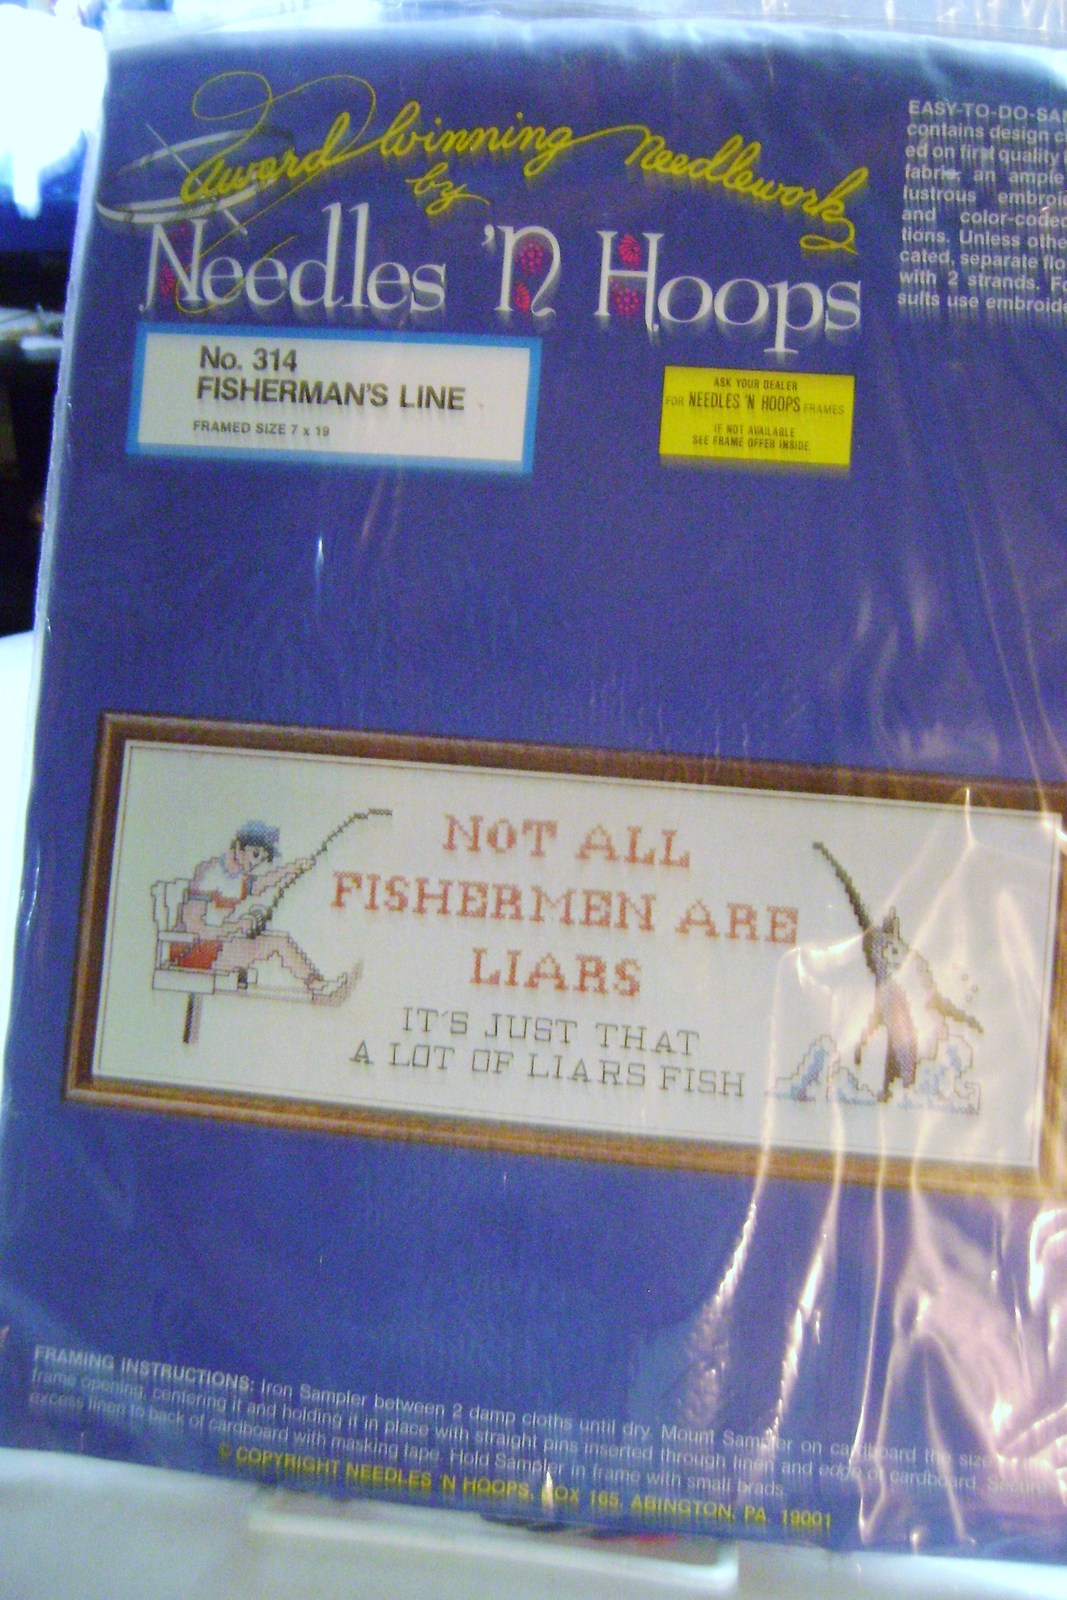 Needles 'N Hoops Cross- Stitch "Not All Fishermen Are Liars" - $14.00